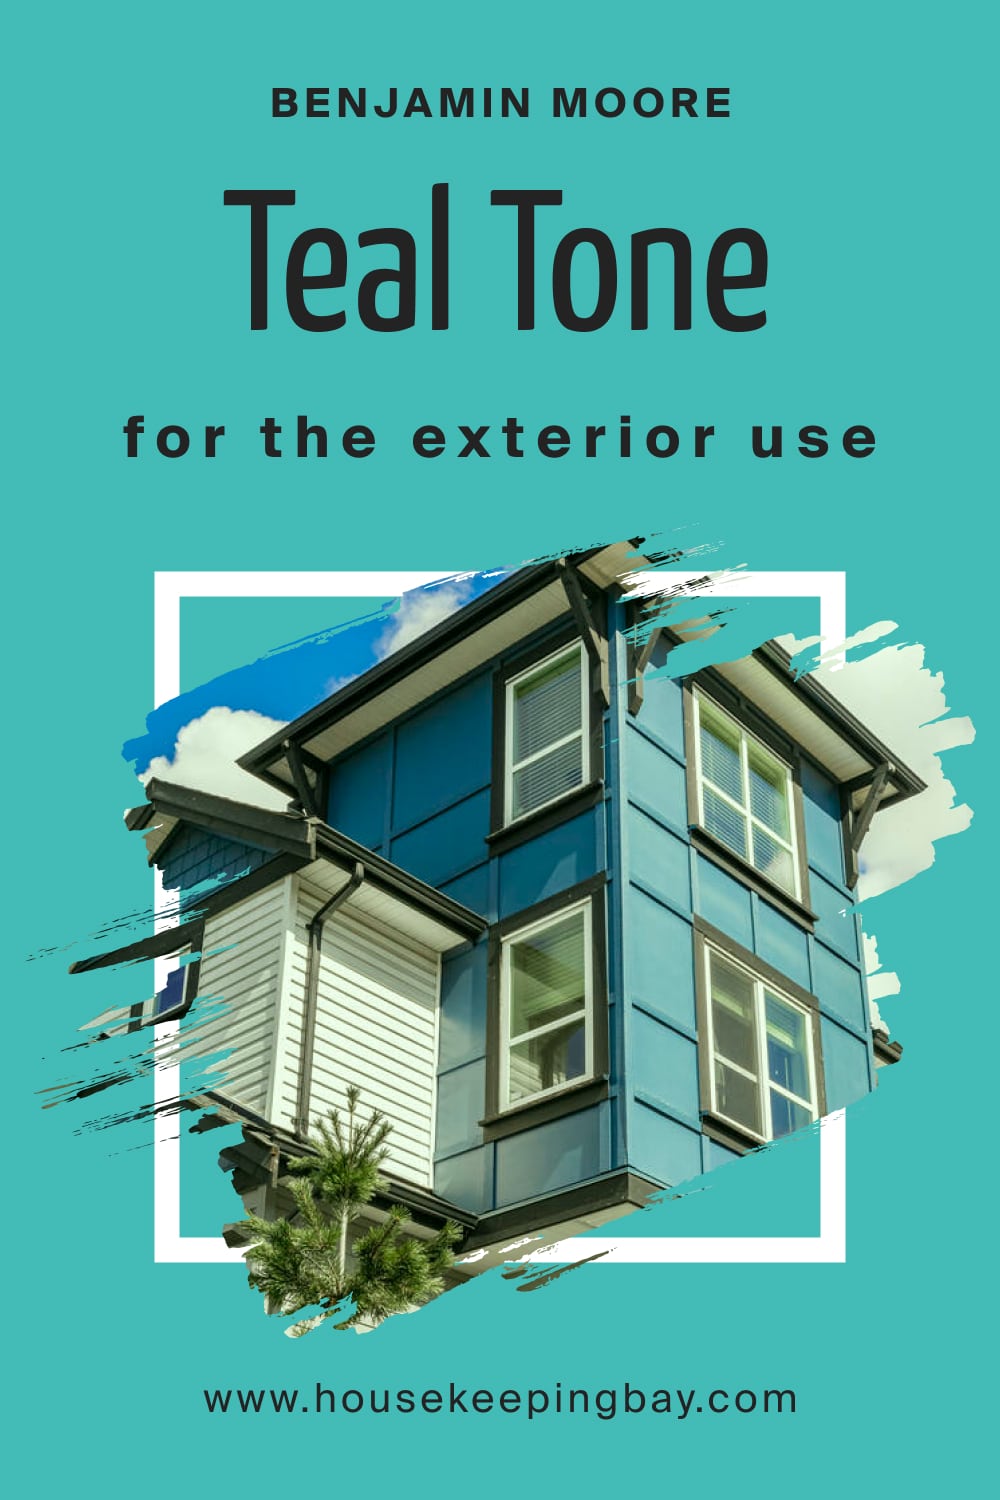 Benjamin Moore. BM Teal Tone 663 for the Exterior Use